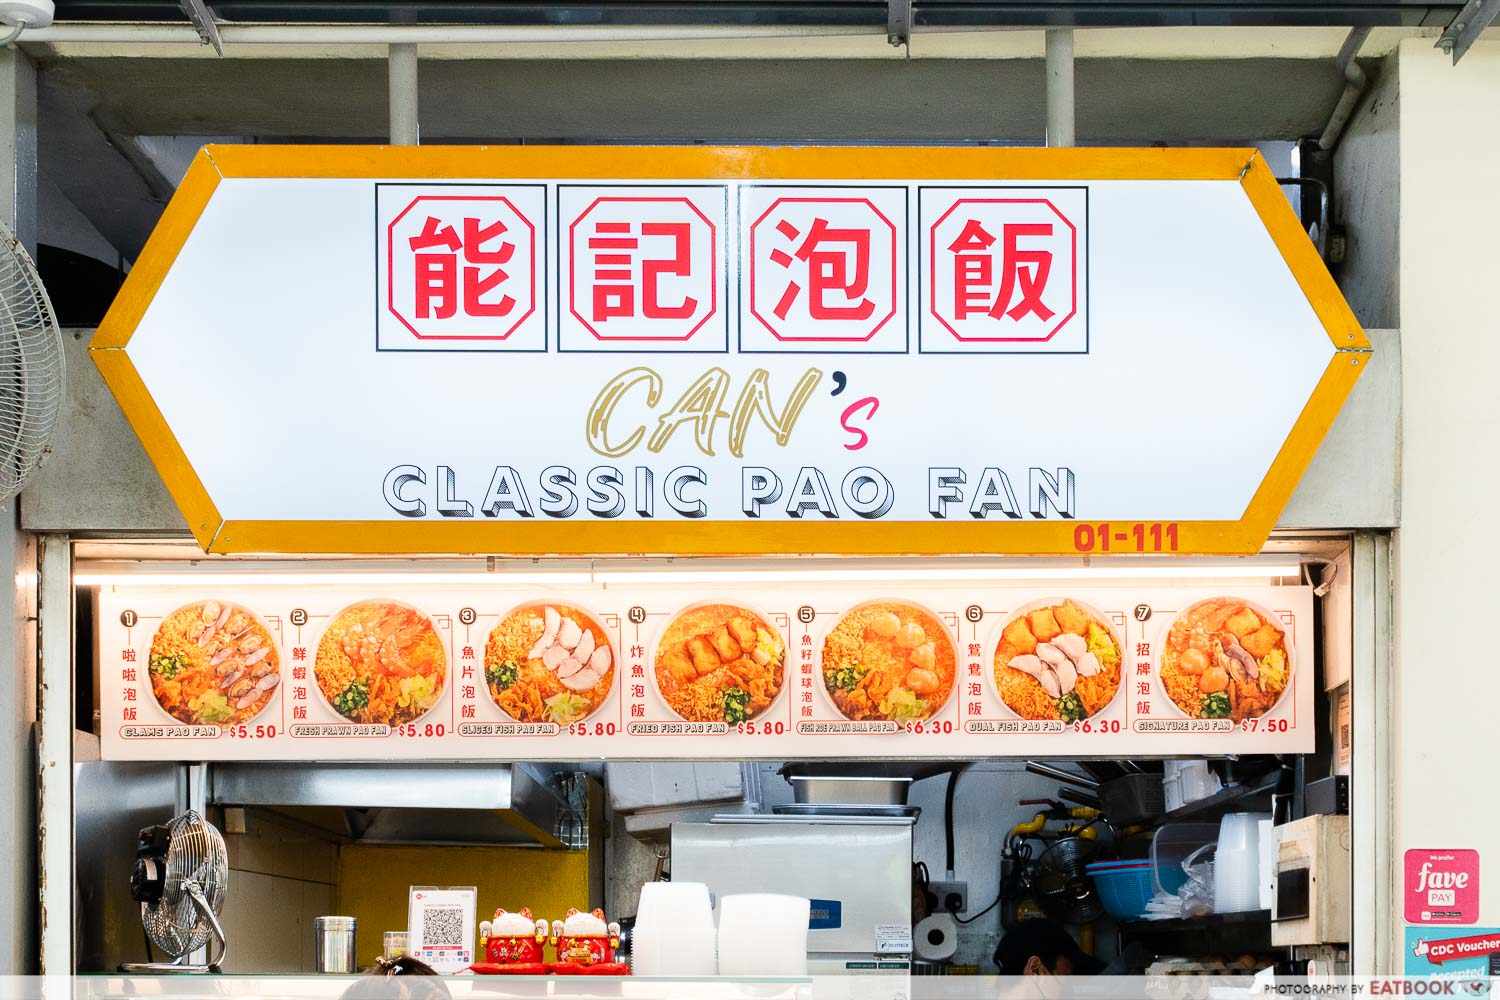 can classic pao fan storefront